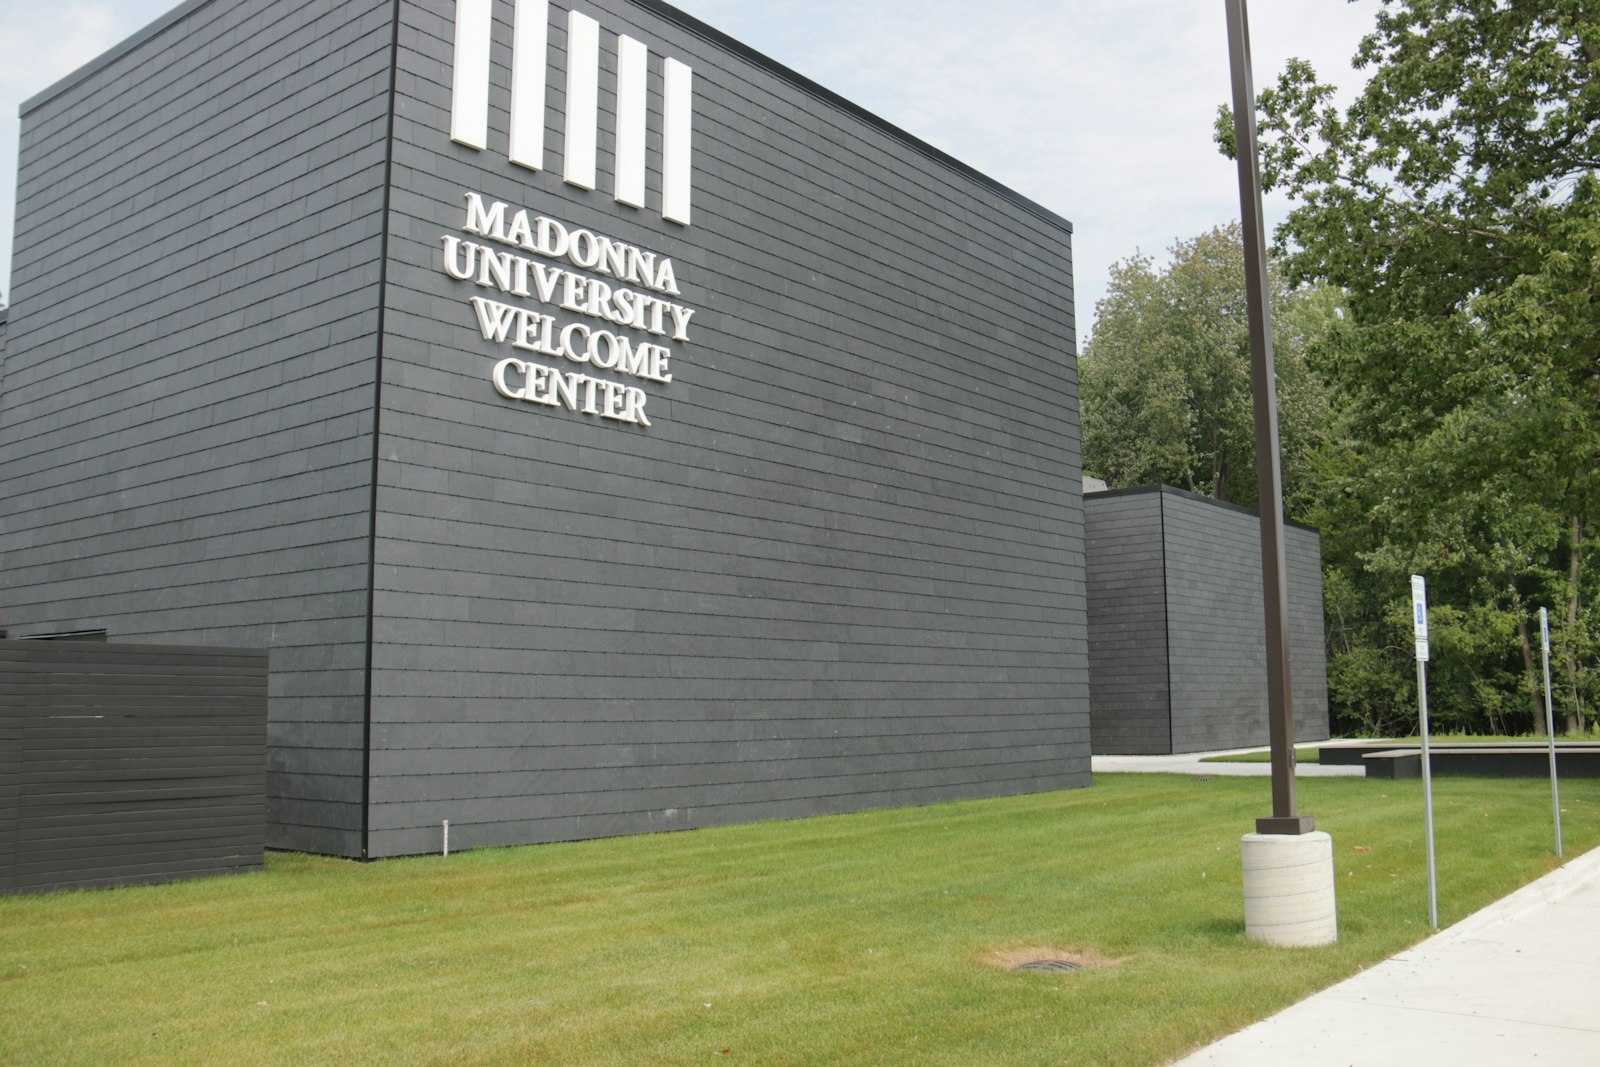 Grandillo oversaw the construction of the the 28,000-square-foot Welcome Center at Madonna University.